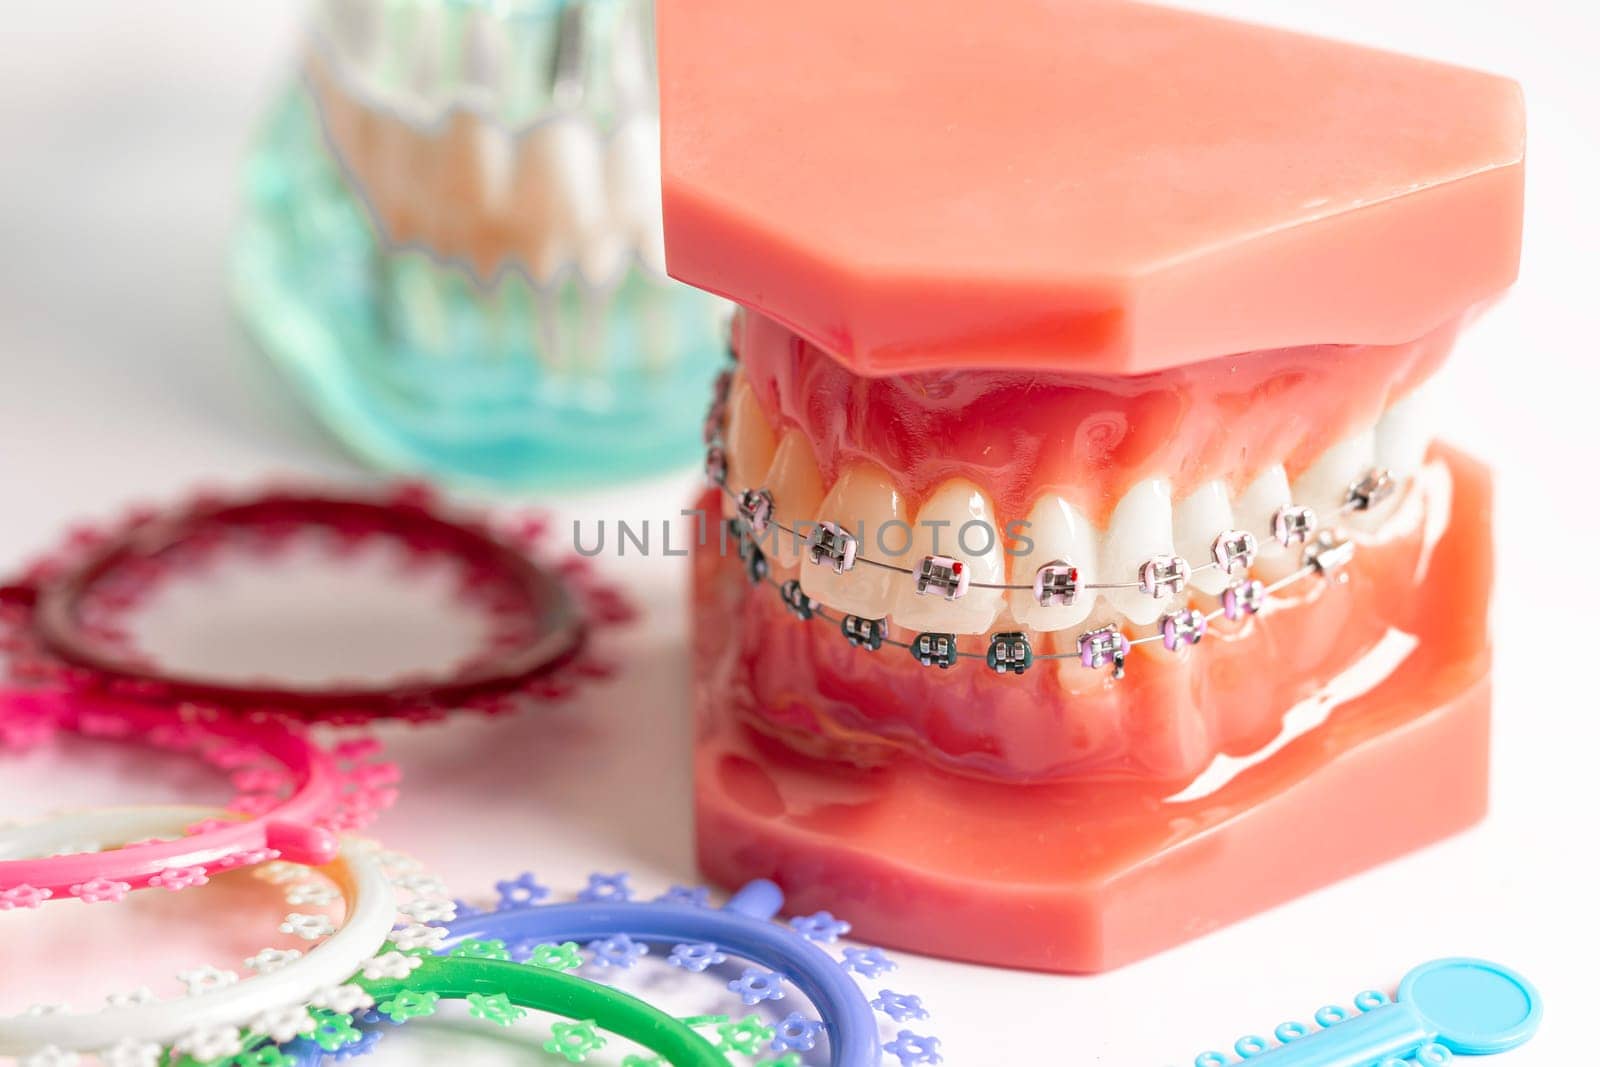 Orthodontic ligatures rings and ties, elastic rubber bands on orthodontic braces, model for dentist studying about dentistry.